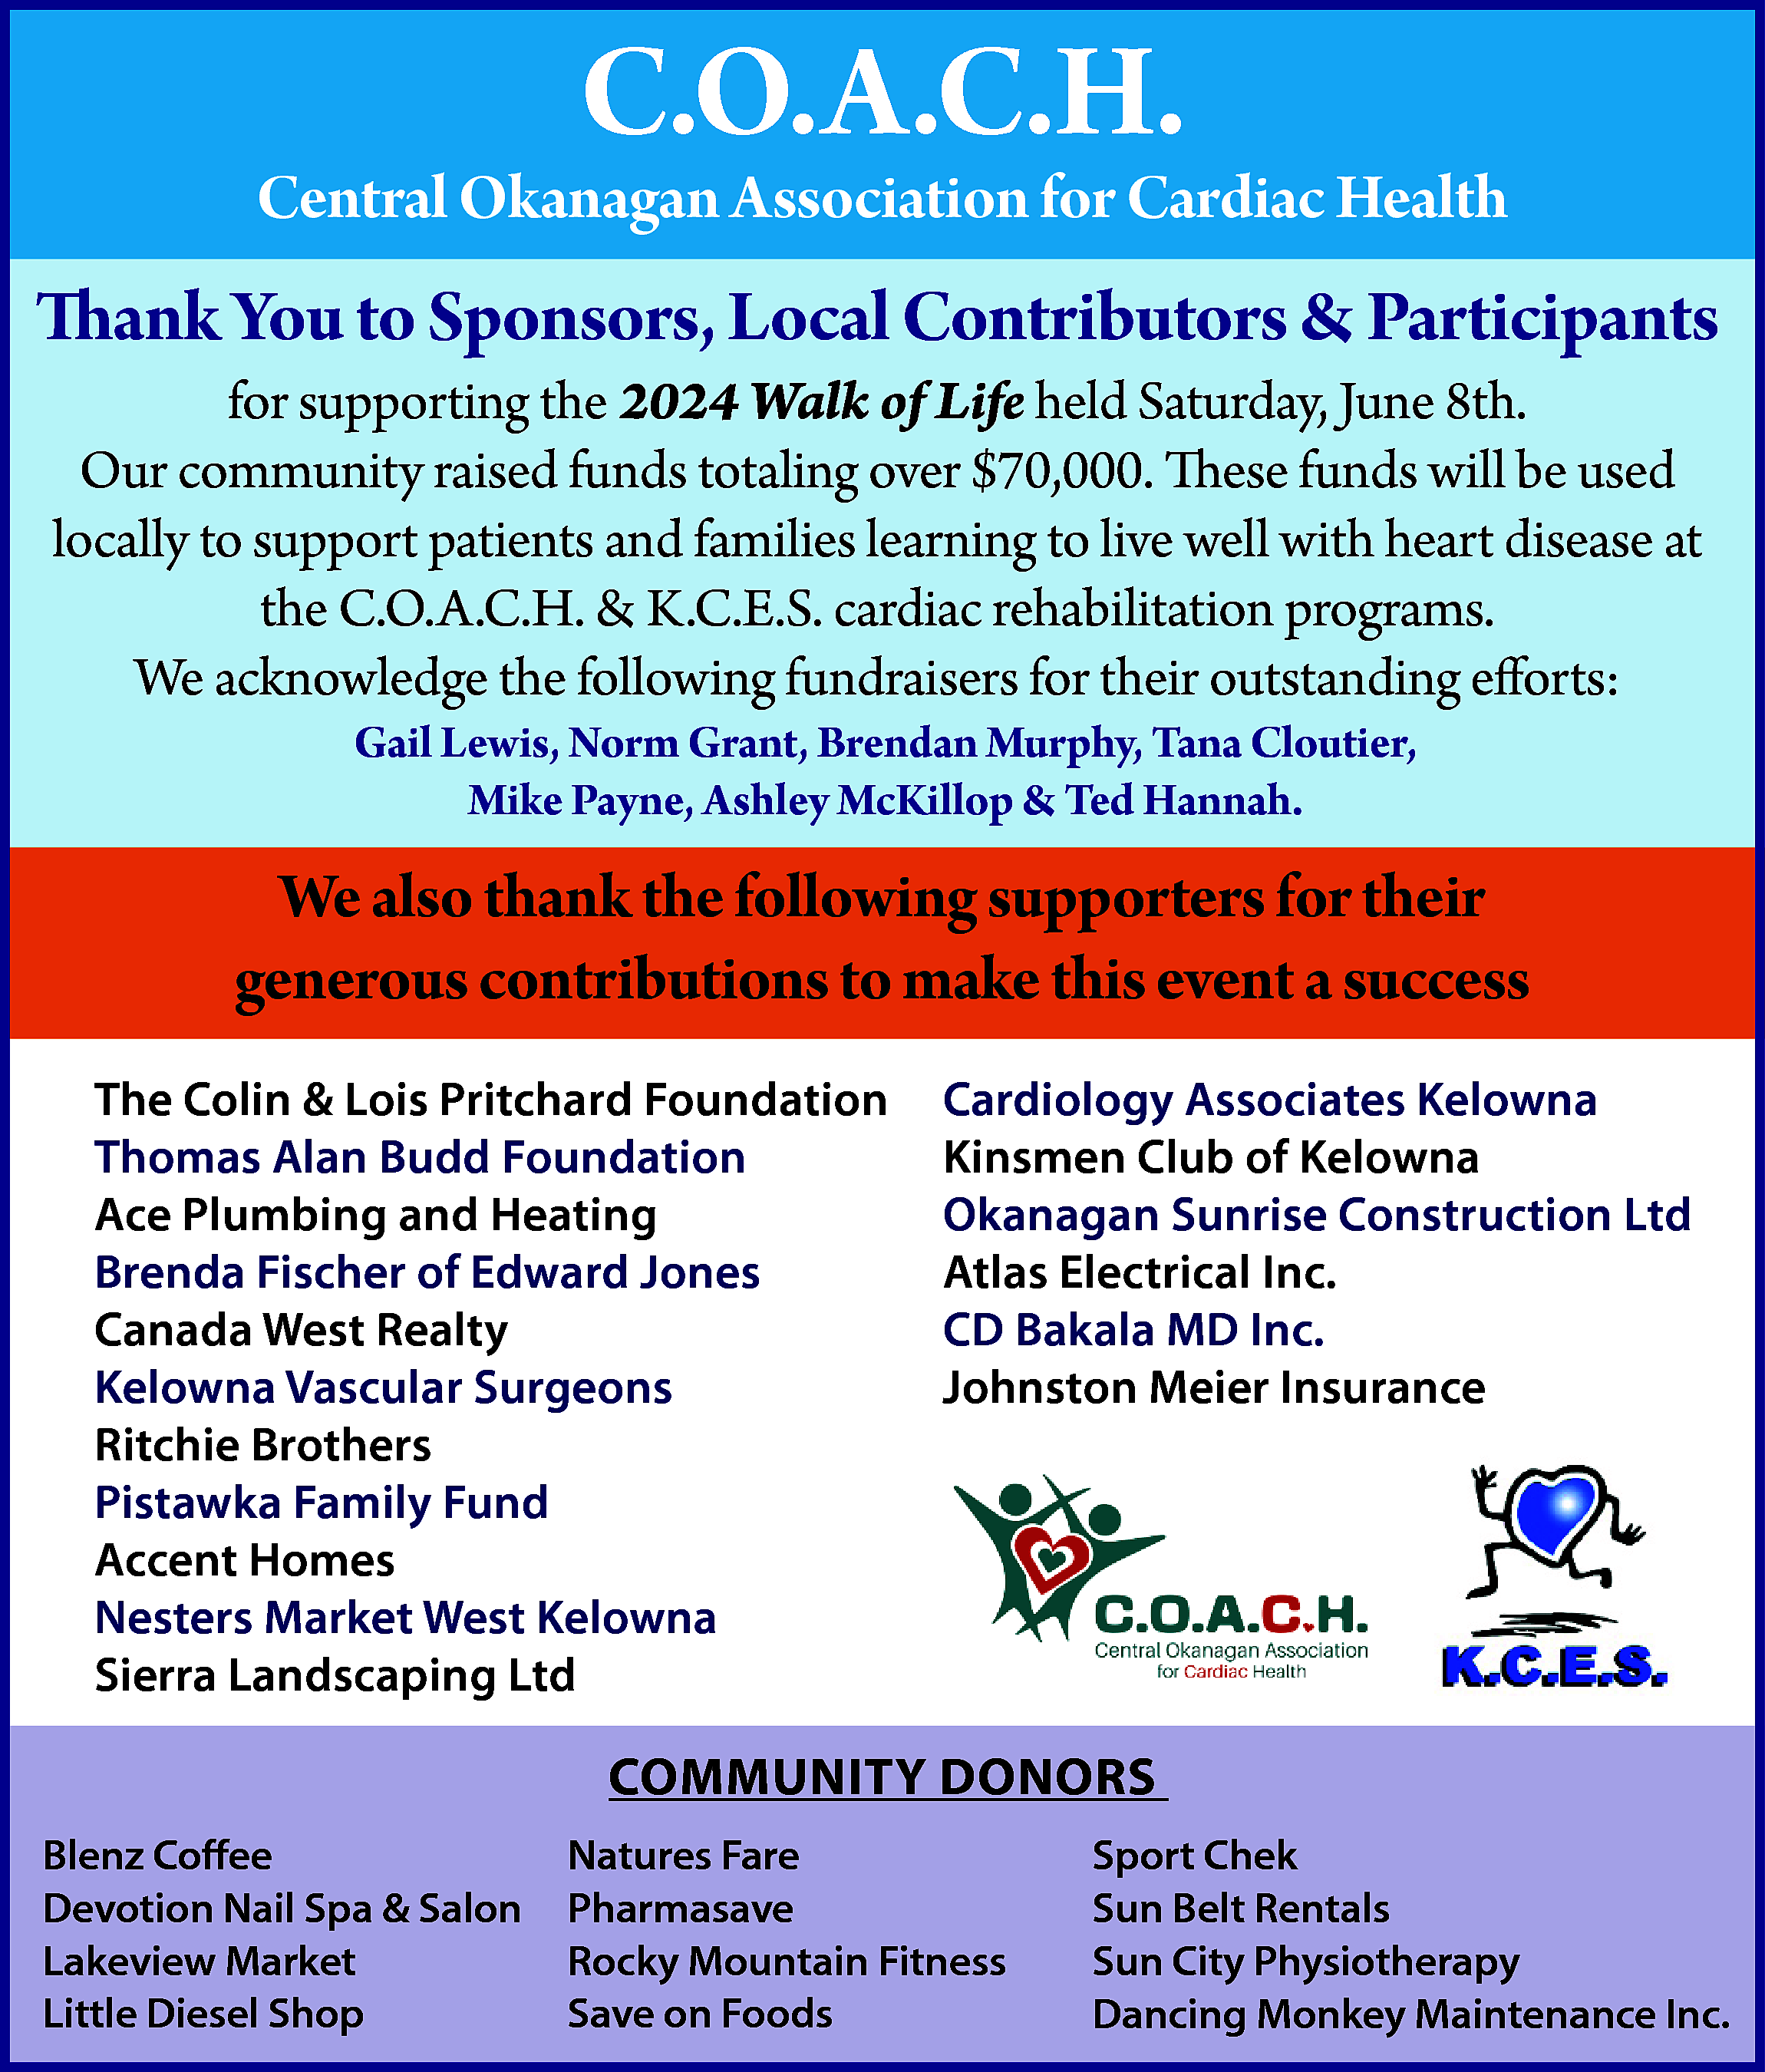 C.O.A.C.H. <br> <br>Central Okanagan Association  C.O.A.C.H.    Central Okanagan Association for Cardiac Health    Thank You to Sponsors, Local Contributors & Participants  for supporting the 2024 Walk of Life held Saturday, June 8th.  Our community raised funds totaling over $70,000. These funds will be used  locally to support patients and families learning to live well with heart disease at  the C.O.A.C.H. & K.C.E.S. cardiac rehabilitation programs.  We acknowledge the following fundraisers for their outstanding efforts:  Gail Lewis, Norm Grant, Brendan Murphy, Tana Cloutier,  Mike Payne, Ashley McKillop & Ted Hannah.    We also thank the following supporters for their  generous contributions to make this event a success  The Colin & Lois Pritchard Foundation  Thomas Alan Budd Foundation  Ace Plumbing and Heating  Brenda Fischer of Edward Jones  Canada West Realty  Kelowna Vascular Surgeons  Ritchie Brothers  Pistawka Family Fund  Accent Homes  Nesters Market West Kelowna  Sierra Landscaping Ltd    Cardiology Associates Kelowna  Kinsmen Club of Kelowna  Okanagan Sunrise Construction Ltd  Atlas Electrical Inc.  CD Bakala MD Inc.  Johnston Meier Insurance    COMMUNITY DONORS  Blenz Coffee  Devotion Nail Spa & Salon  Lakeview Market  Little Diesel Shop    Natures Fare  Pharmasave  Rocky Mountain Fitness  Save on Foods    Sport Chek  Sun Belt Rentals  Sun City Physiotherapy  Dancing Monkey Maintenance Inc.    